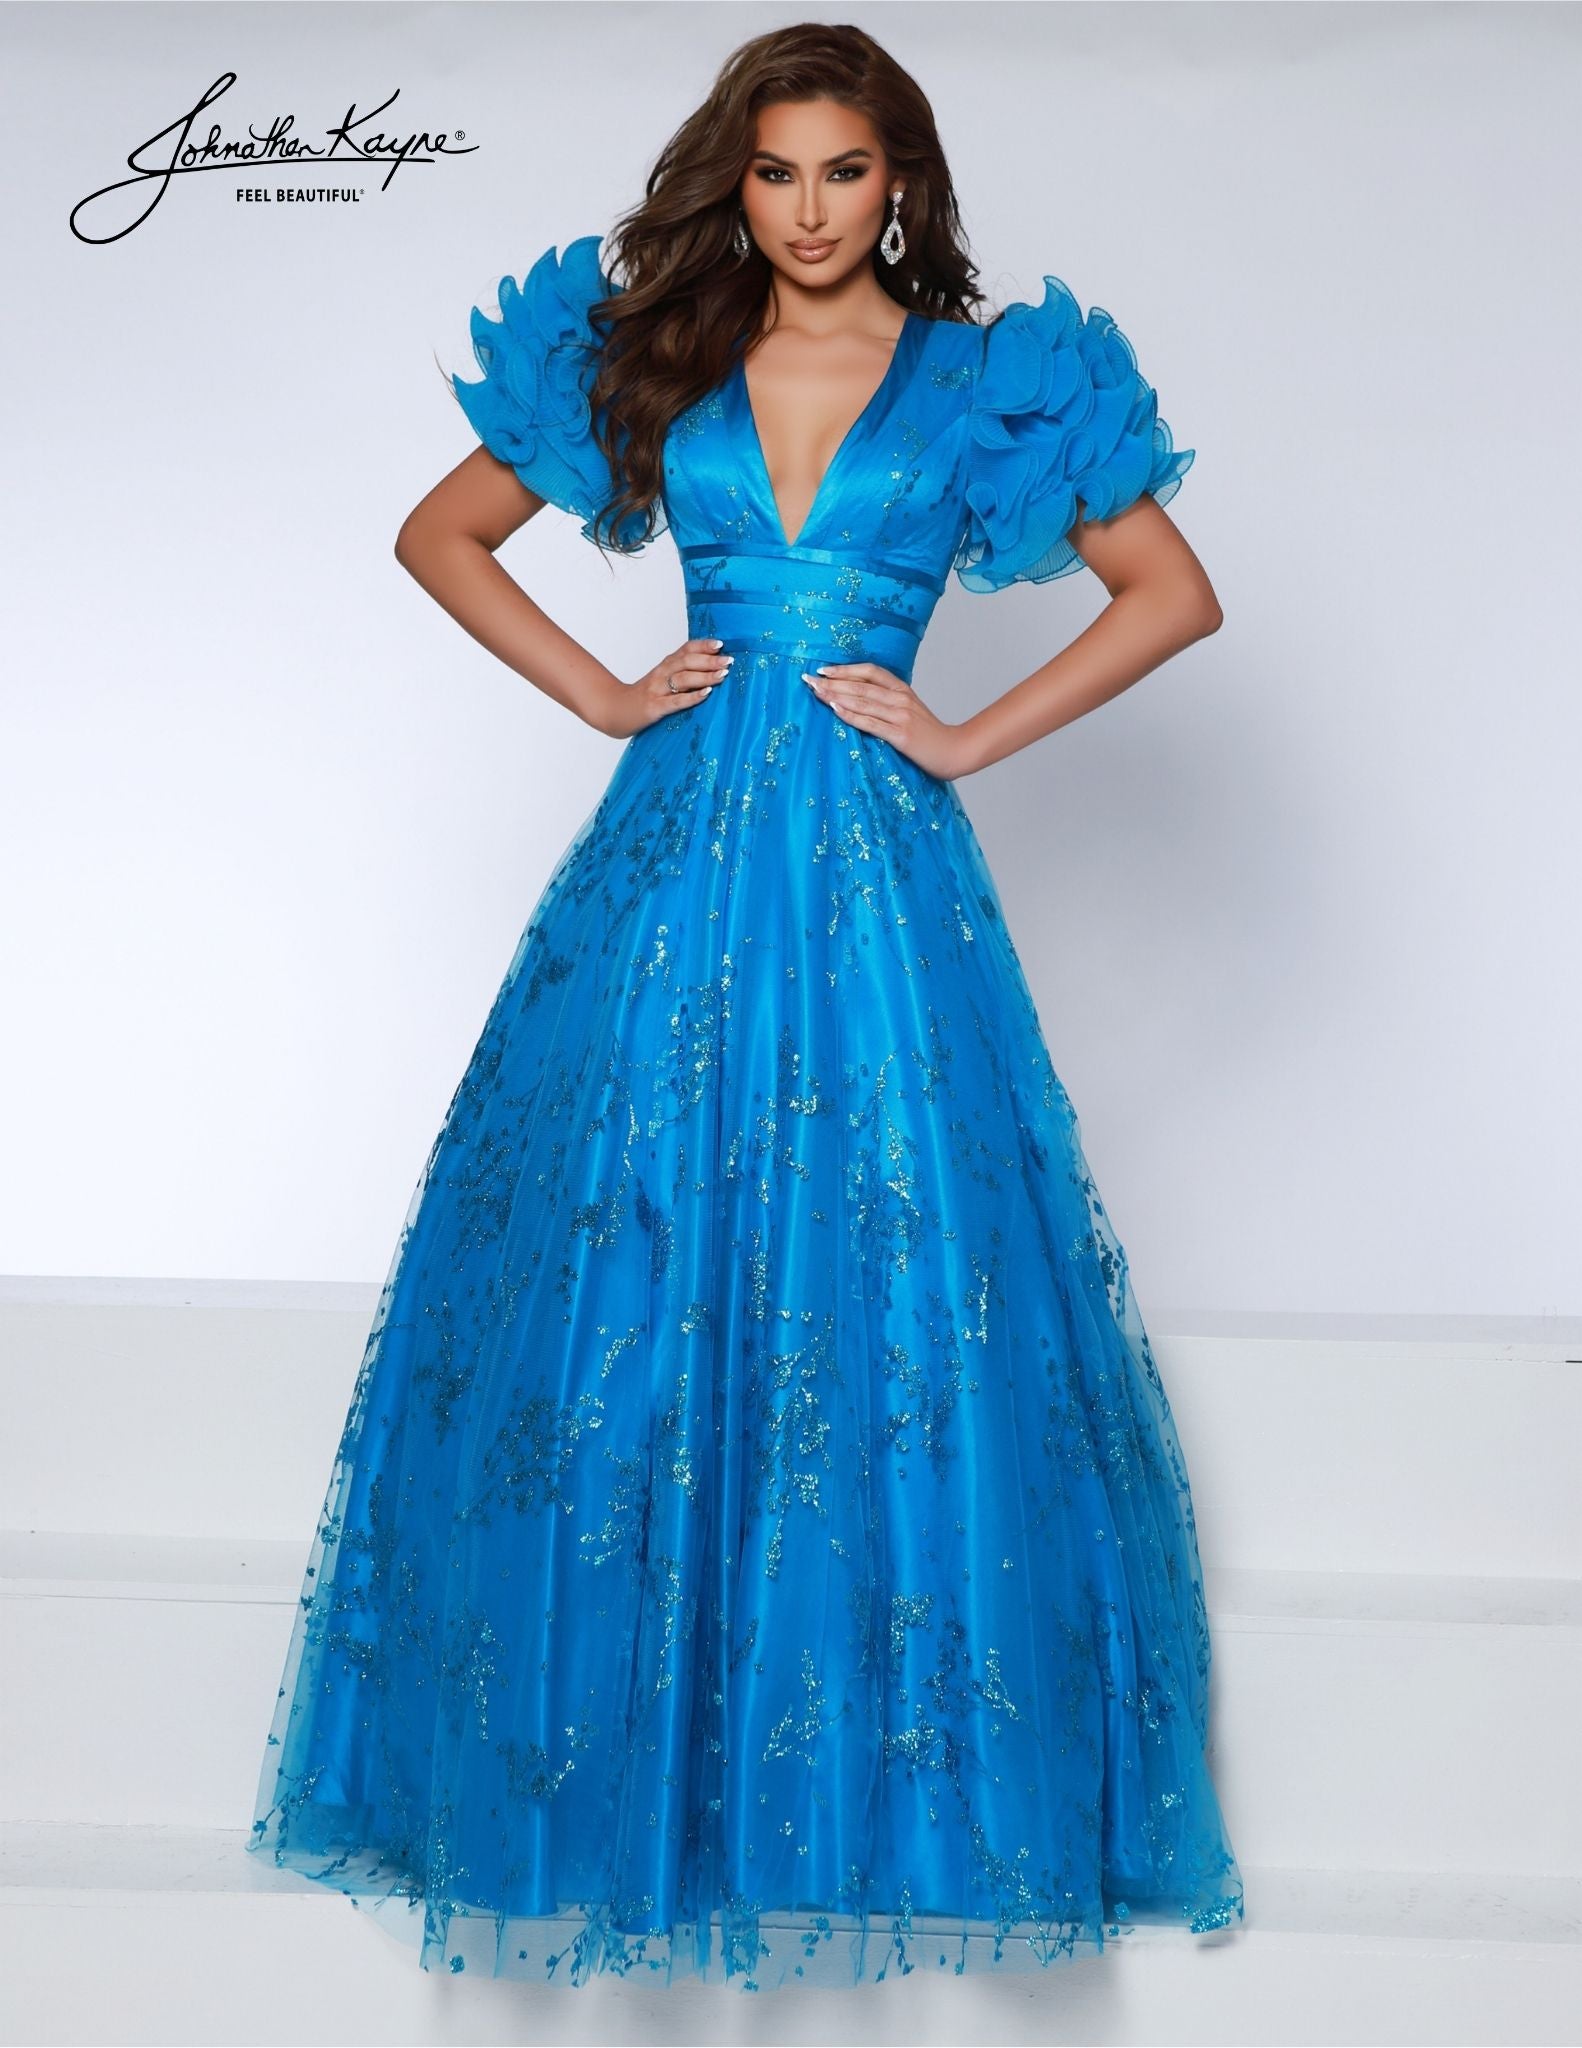 Capture attention at any formal event in the Johnathan Kayne 2841 dress. Crafted with an A- Line bodice, intricate puff sleeves, and full tulle skirt, this glamorous ballgown is an eye-catching choice for pageants and proms alike. An open back adds to the allure, making it a memorable statement piece. Be the belle of the ball and the envy of all with our glitter ballgown.